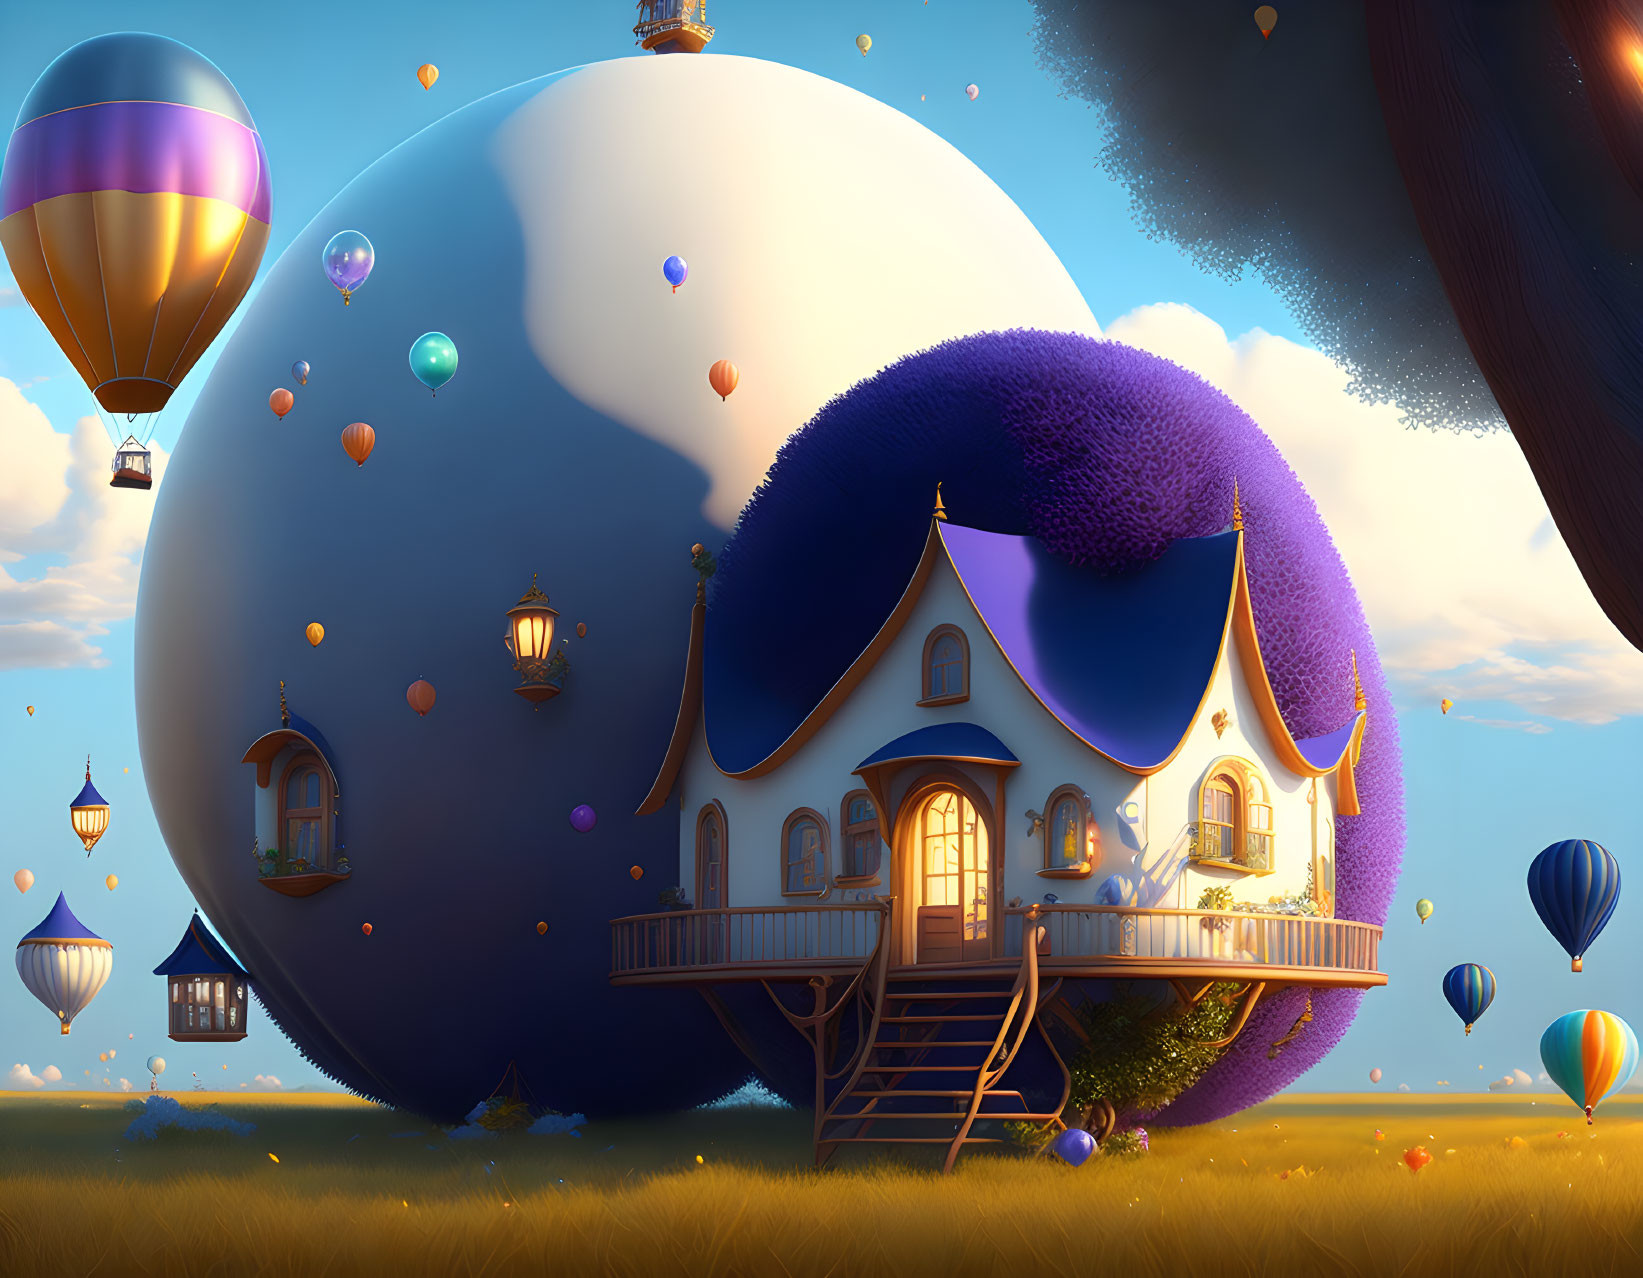 Whimsical purple-roofed house on orb in fantasy landscape